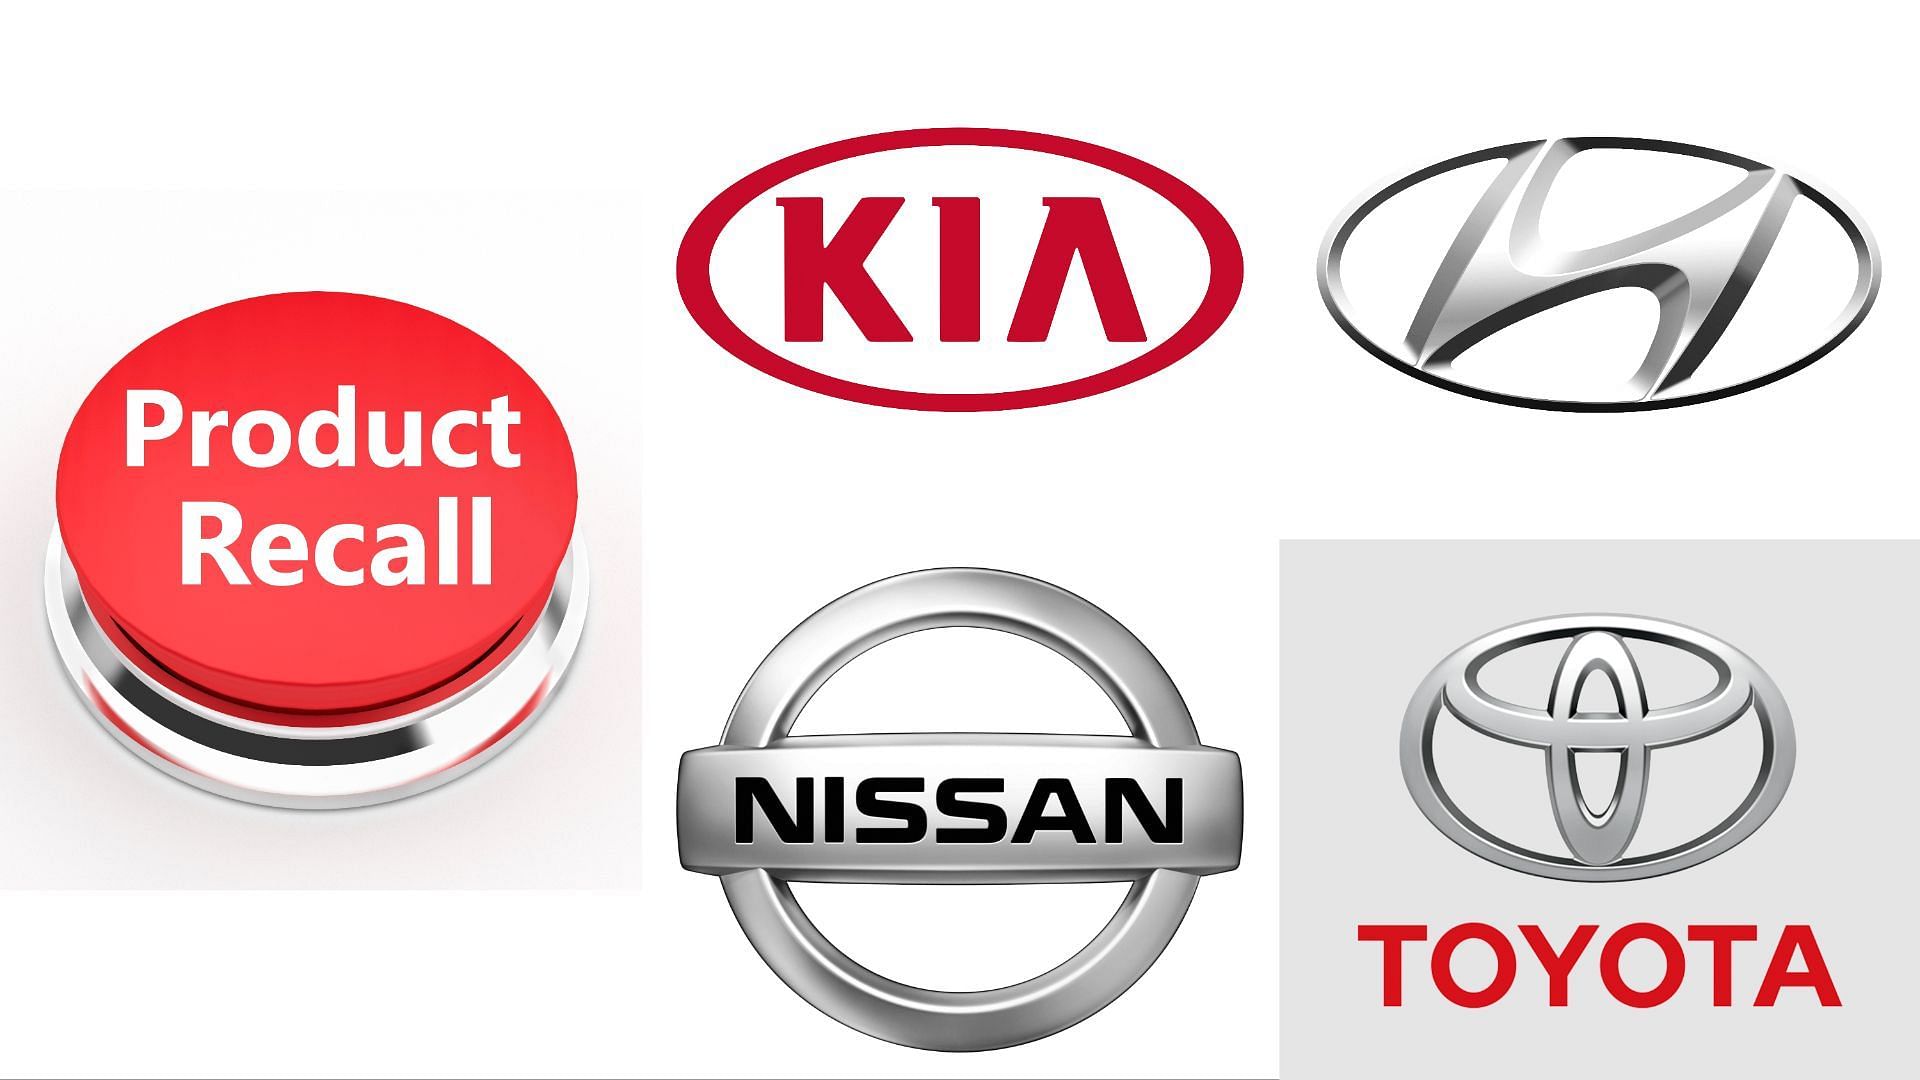 The NHTSA website issued a recall alert for over 347,240 vehicles made by Kia, Hyundai, Toyota, Nissan and others (Image via Kia/Hyundai/Toyota/Nissan)